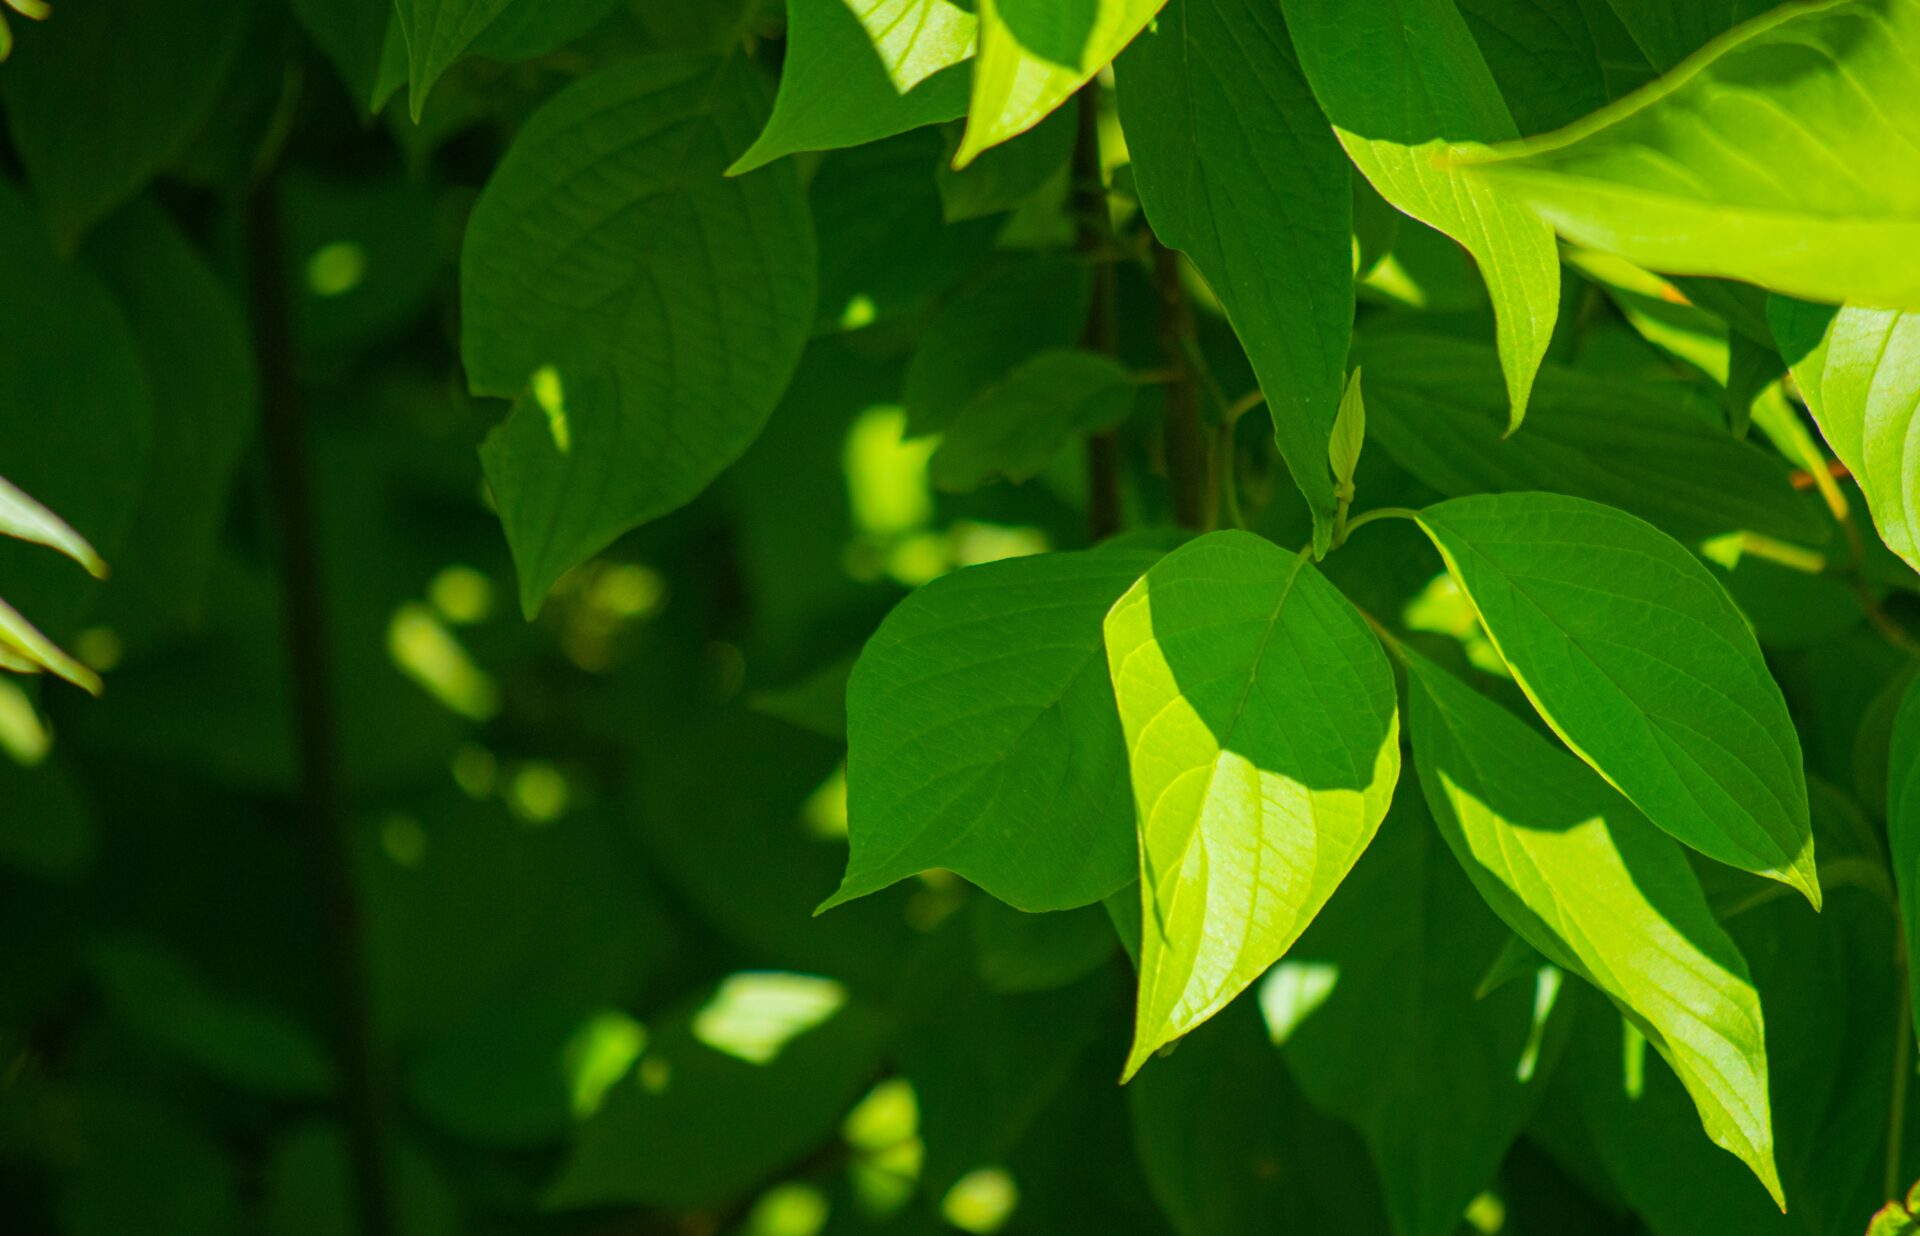 Closeup photo of green leaves on a tree with the sun shining directly on them